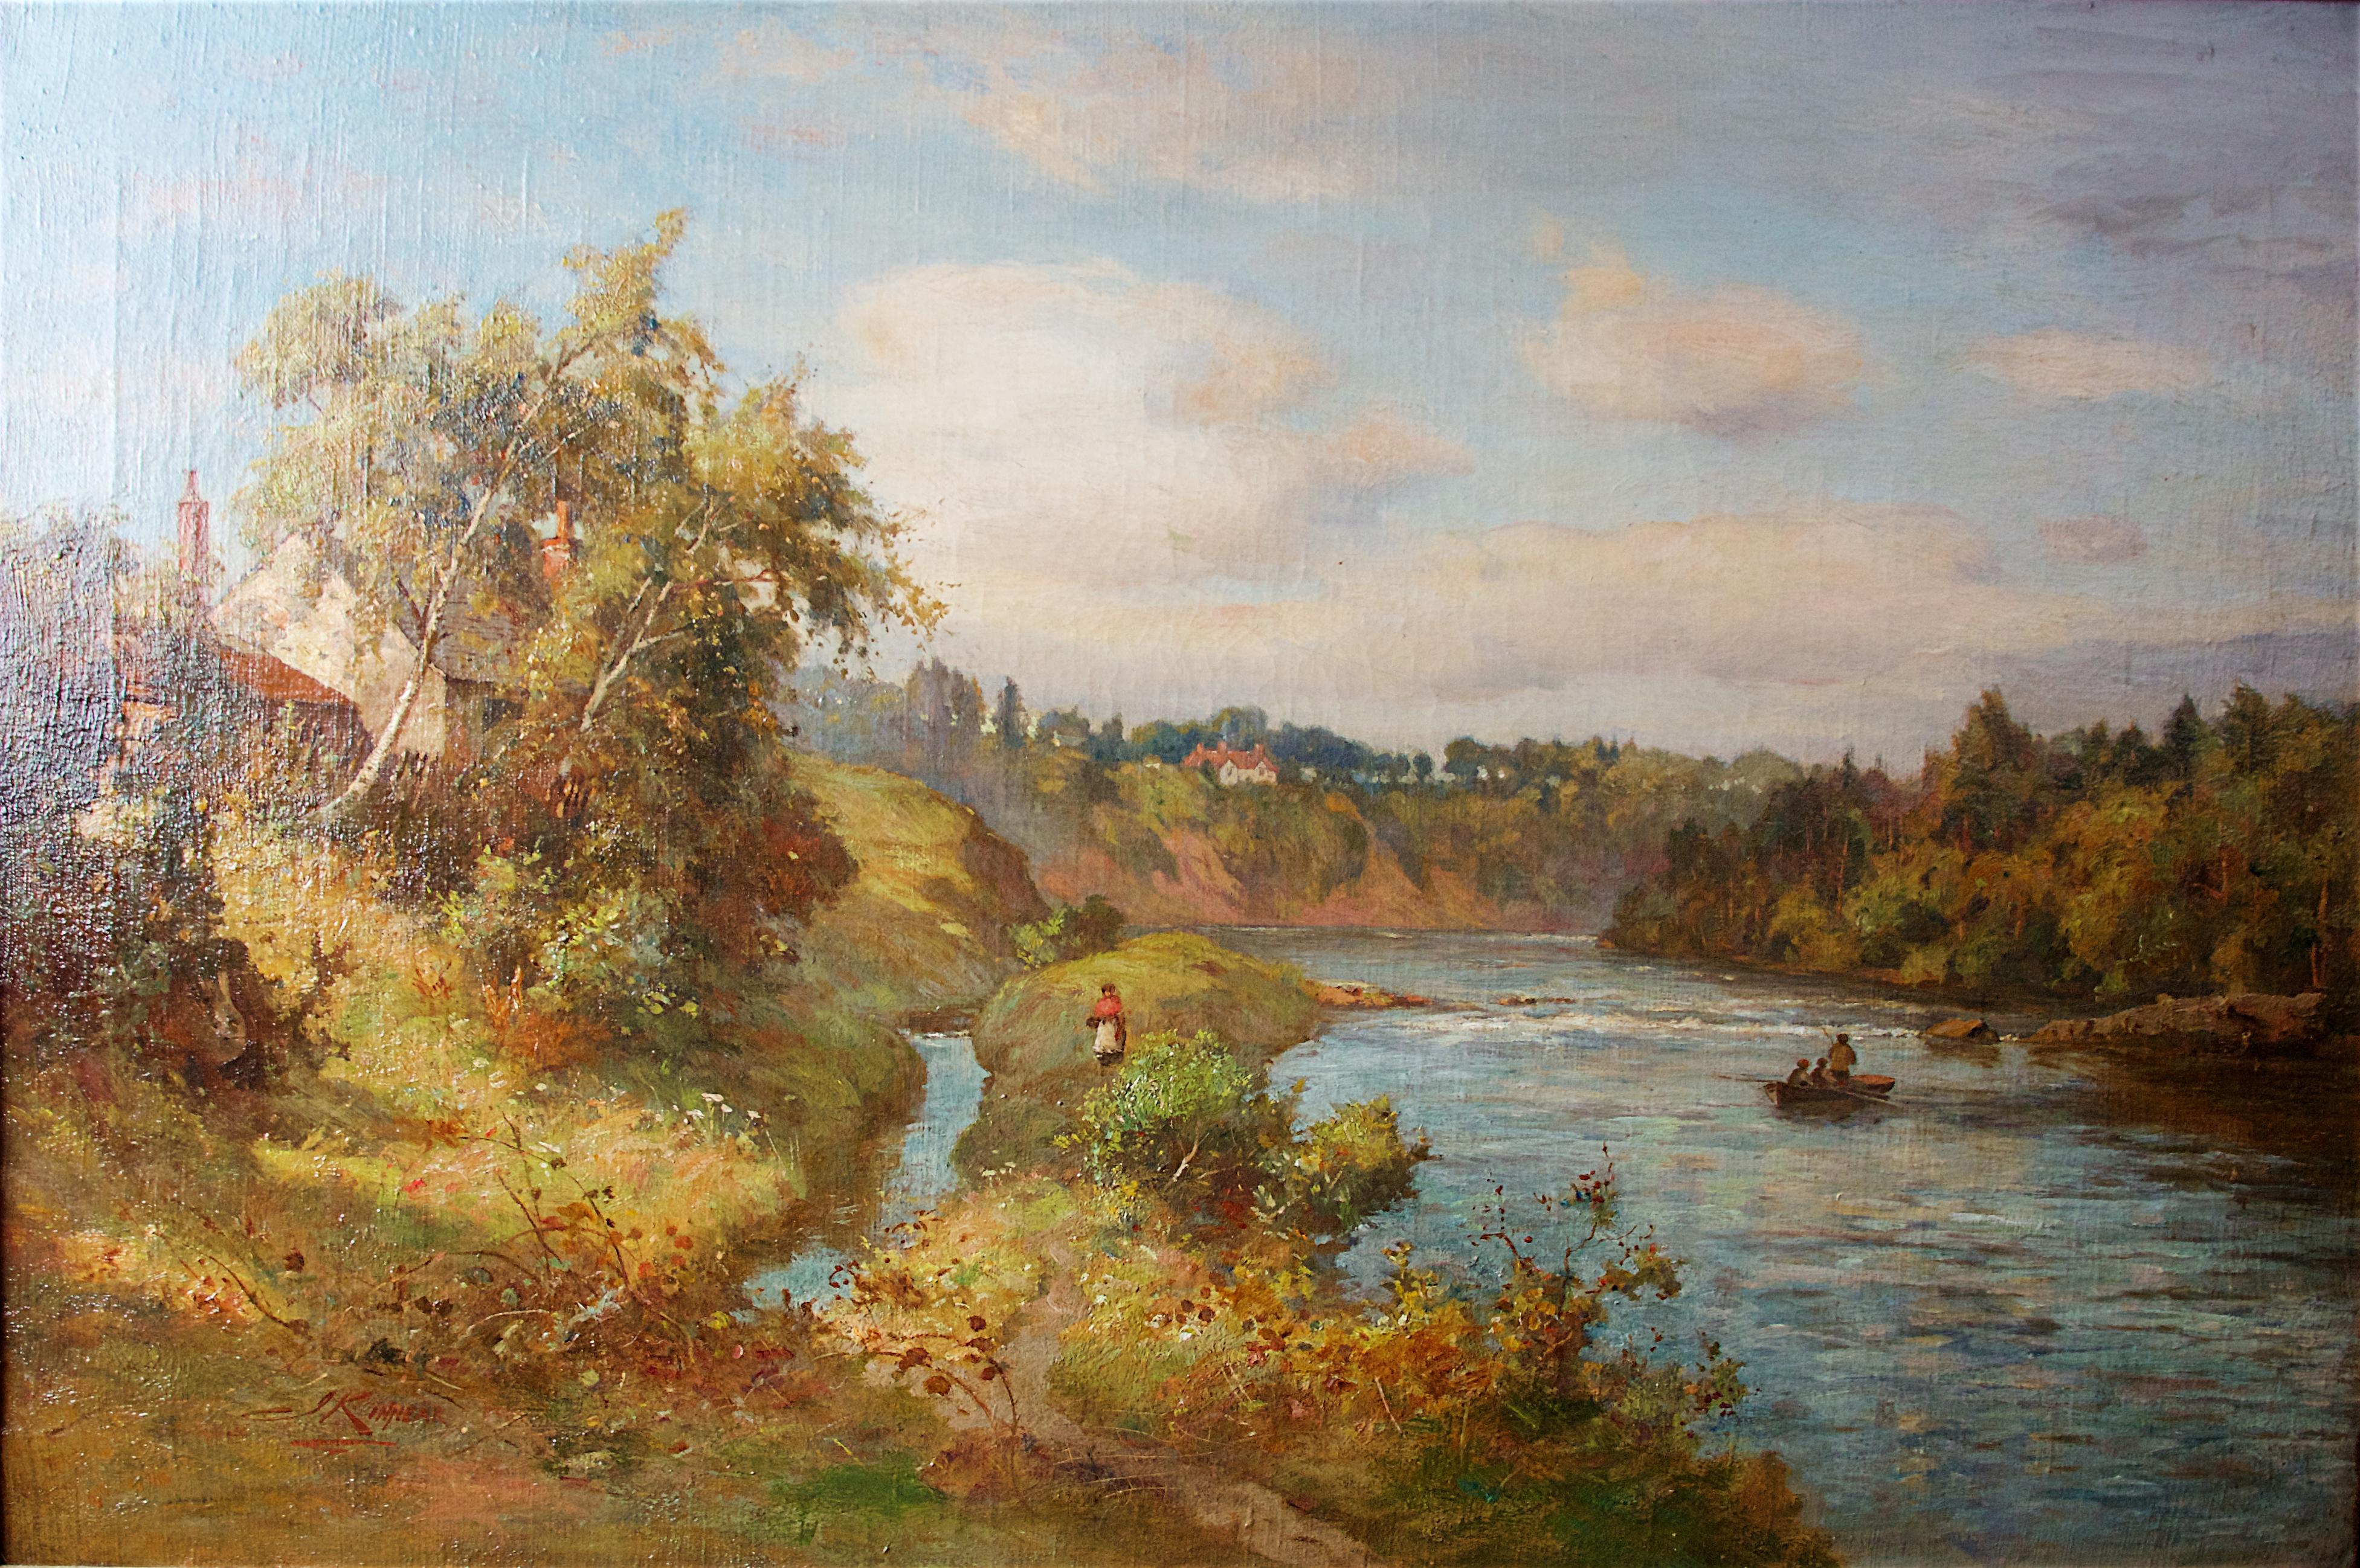 A study of an extensive river landscape by J. Kinnear. Oil on canvas in ornate gilt frame, signed lower left.
Edinburgh born James Kinnear exhibited at several institutes including The Glasgow Institute of Fine Arts and The Royal Institute of